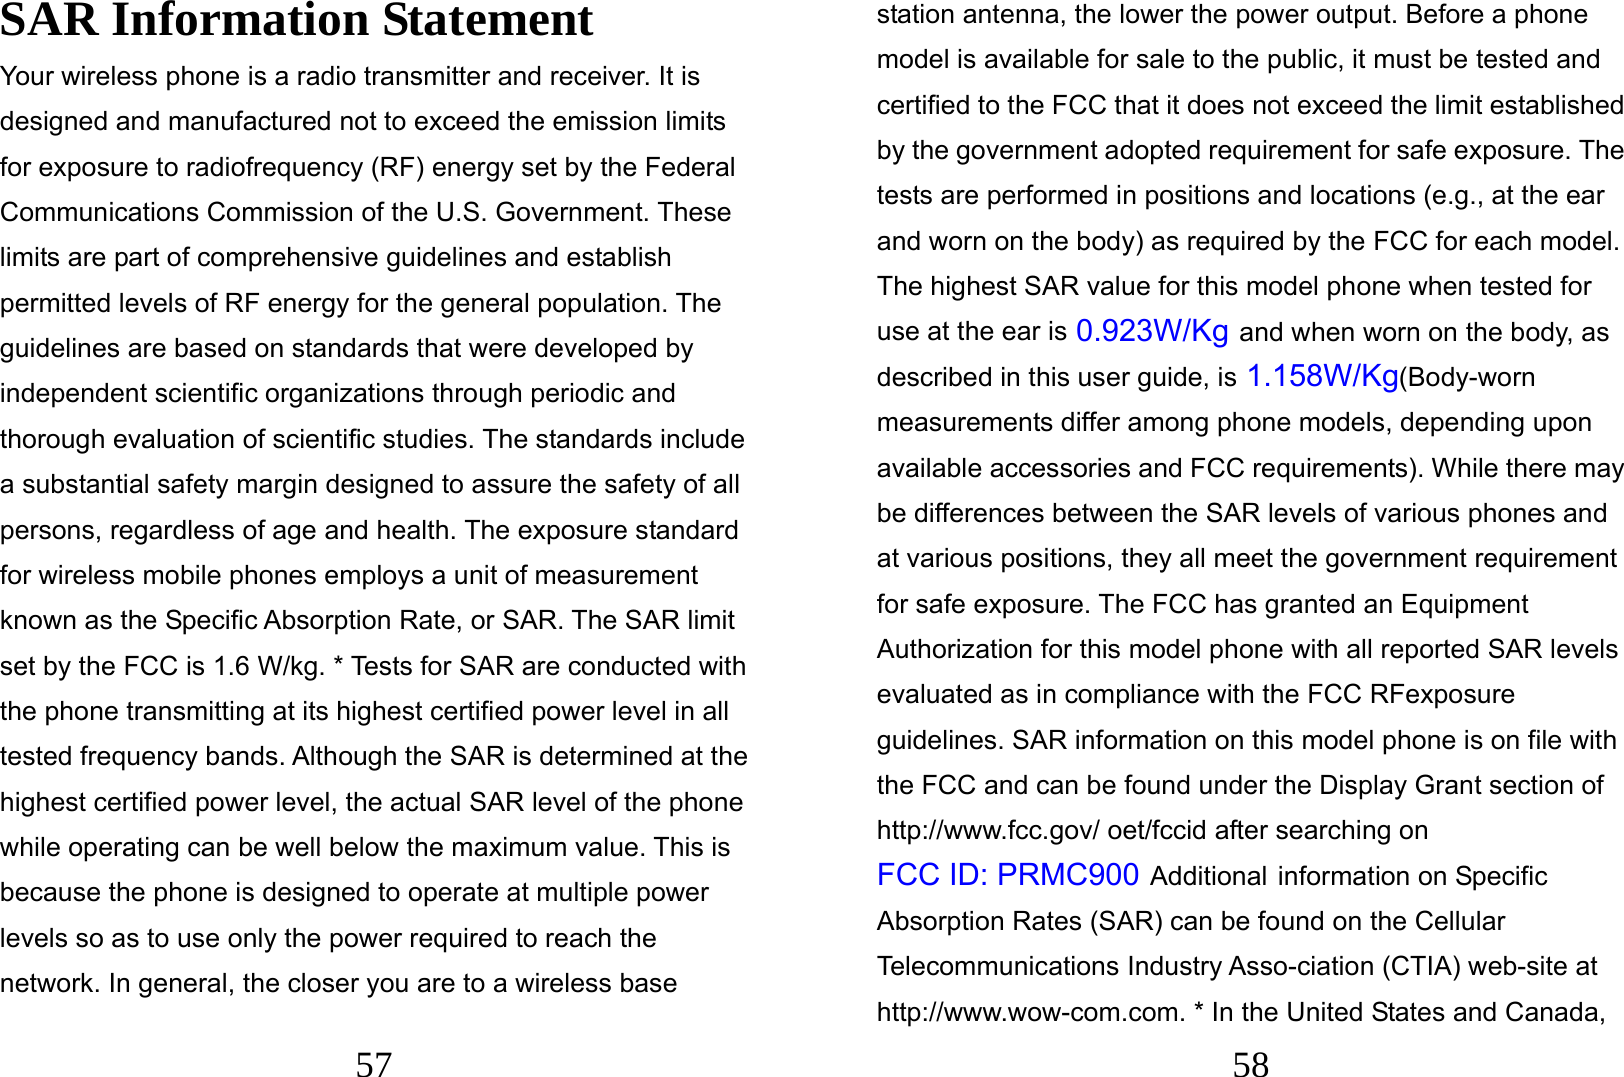  57 SAR Information Statement Your wireless phone is a radio transmitter and receiver. It is designed and manufactured not to exceed the emission limits for exposure to radiofrequency (RF) energy set by the Federal Communications Commission of the U.S. Government. These limits are part of comprehensive guidelines and establish permitted levels of RF energy for the general population. The guidelines are based on standards that were developed by independent scientific organizations through periodic and thorough evaluation of scientific studies. The standards include a substantial safety margin designed to assure the safety of all persons, regardless of age and health. The exposure standard for wireless mobile phones employs a unit of measurement known as the Specific Absorption Rate, or SAR. The SAR limit set by the FCC is 1.6 W/kg. * Tests for SAR are conducted with the phone transmitting at its highest certified power level in all tested frequency bands. Although the SAR is determined at the highest certified power level, the actual SAR level of the phone while operating can be well below the maximum value. This is because the phone is designed to operate at multiple power levels so as to use only the power required to reach the network. In general, the closer you are to a wireless base  58 station antenna, the lower the power output. Before a phone model is available for sale to the public, it must be tested and certified to the FCC that it does not exceed the limit established by the government adopted requirement for safe exposure. The tests are performed in positions and locations (e.g., at the ear and worn on the body) as required by the FCC for each model. The highest SAR value for this model phone when tested for use at the ear is 0.923W/Kg and when worn on the body, as described in this user guide, is 1.158W/Kg(Body-worn measurements differ among phone models, depending upon available accessories and FCC requirements). While there may be differences between the SAR levels of various phones and at various positions, they all meet the government requirement for safe exposure. The FCC has granted an Equipment Authorization for this model phone with all reported SAR levels evaluated as in compliance with the FCC RFexposure guidelines. SAR information on this model phone is on file with the FCC and can be found under the Display Grant section of http://www.fcc.gov/ oet/fccid after searching on   FCC ID: PRMC900 Additional information on Specific Absorption Rates (SAR) can be found on the Cellular Telecommunications Industry Asso-ciation (CTIA) web-site at http://www.wow-com.com. * In the United States and Canada, 